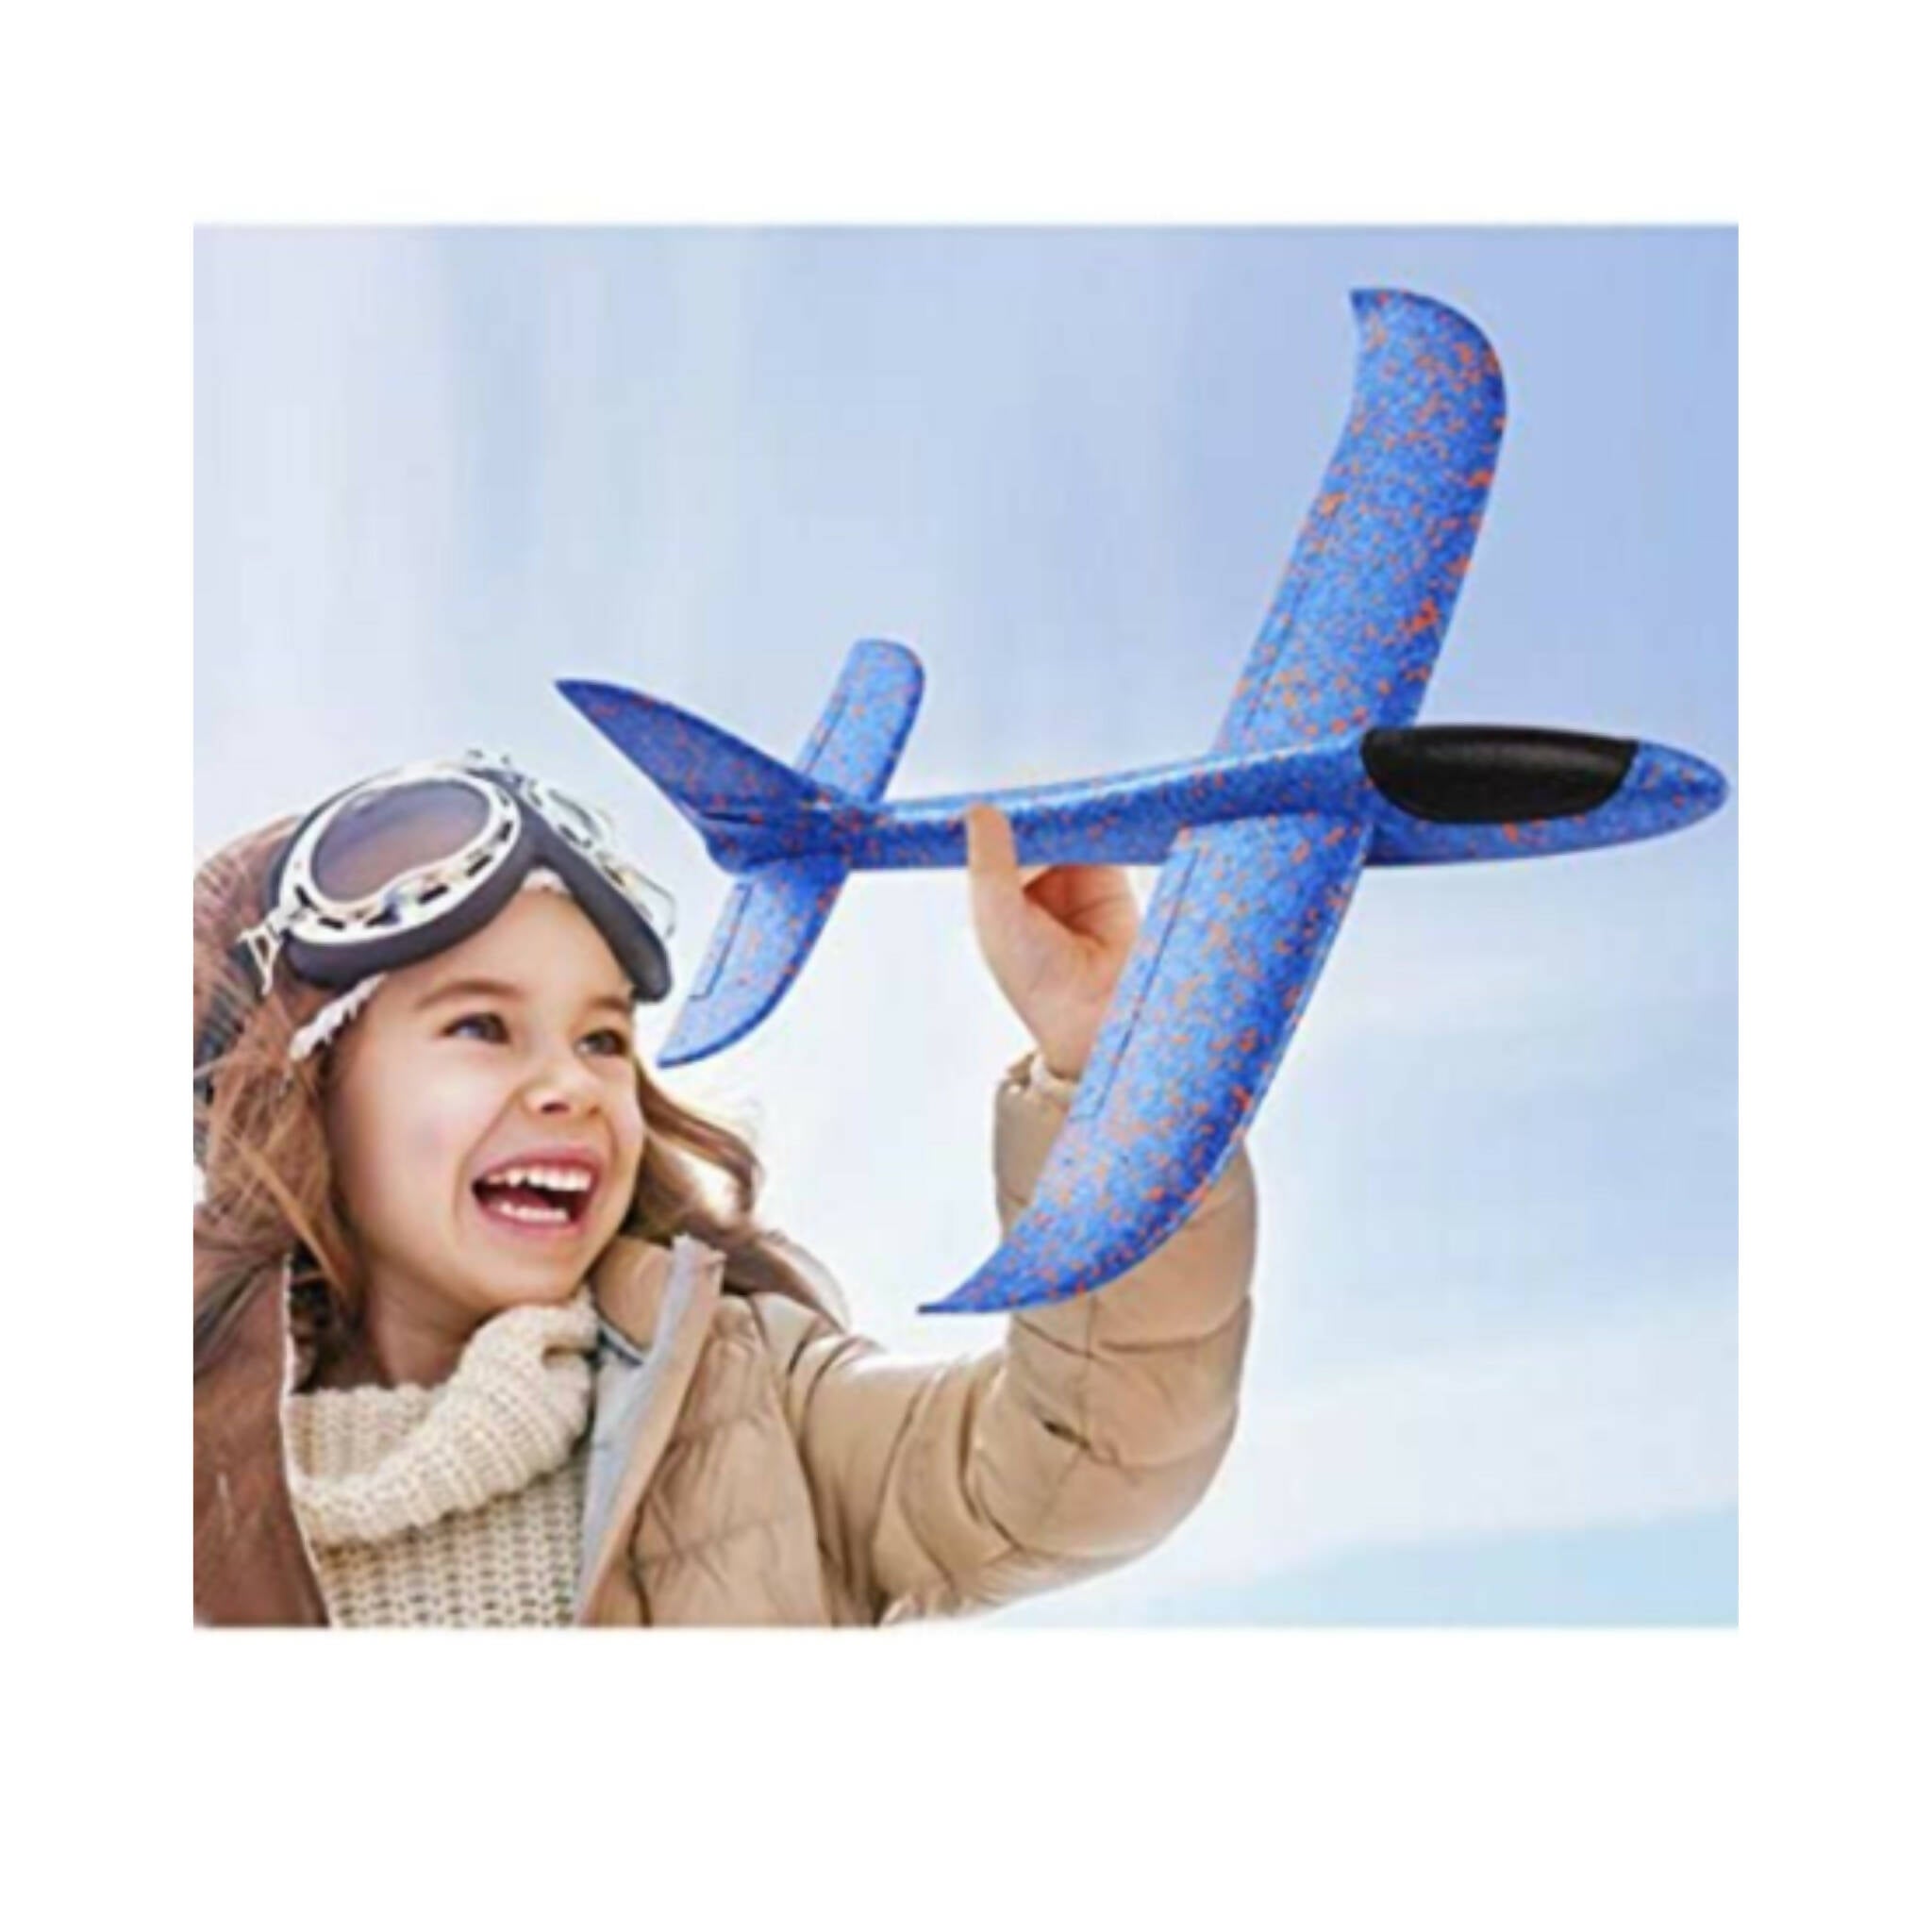 Hand Launching Glider, 35x35cm Air Floating Plane - DIY Toy for All Ages